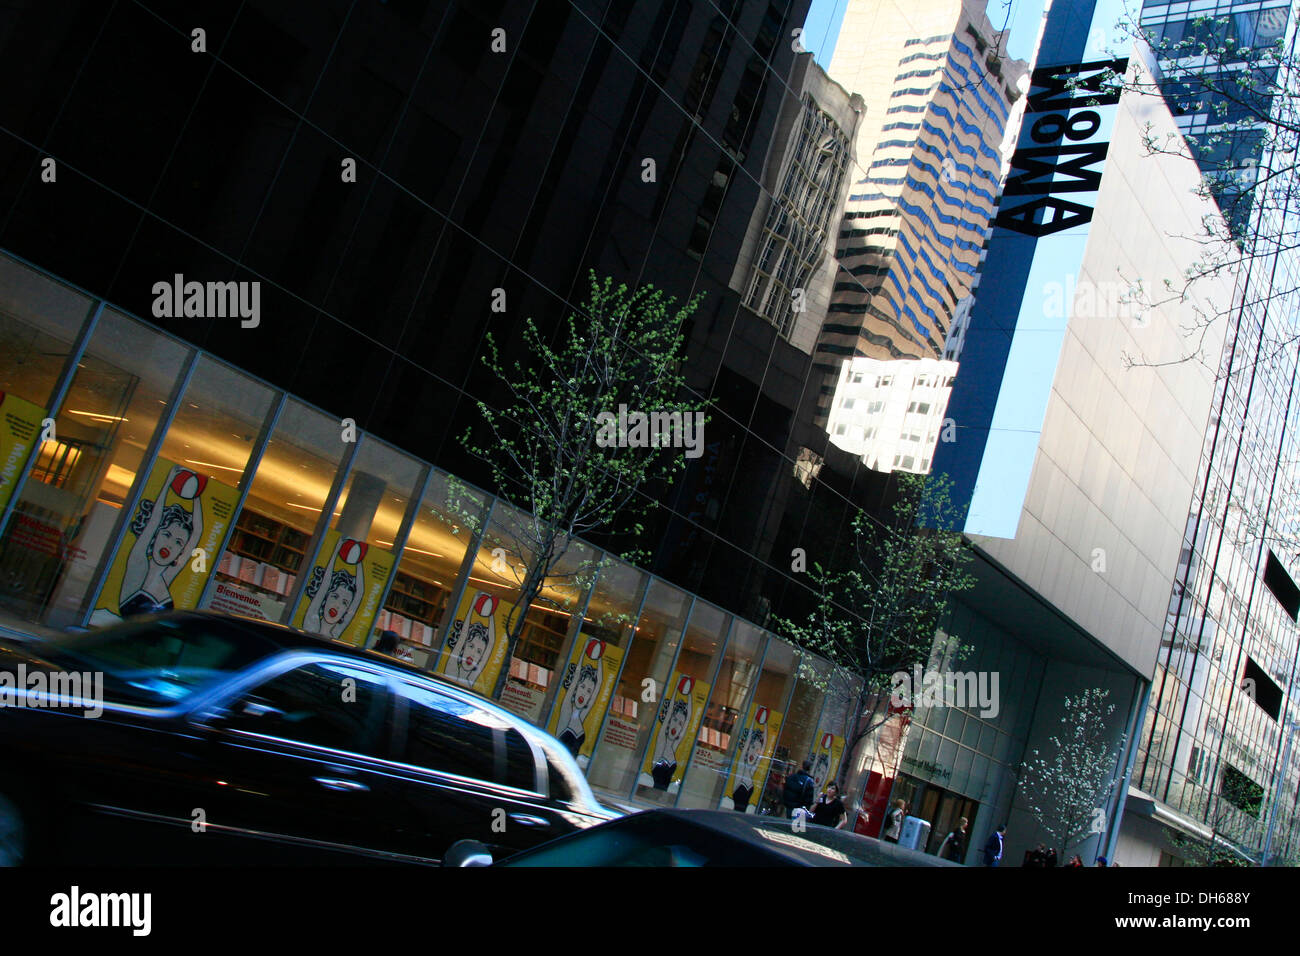 MOMA, main entrance, Museum of Modern Art building in New York City, USA Stock Photo